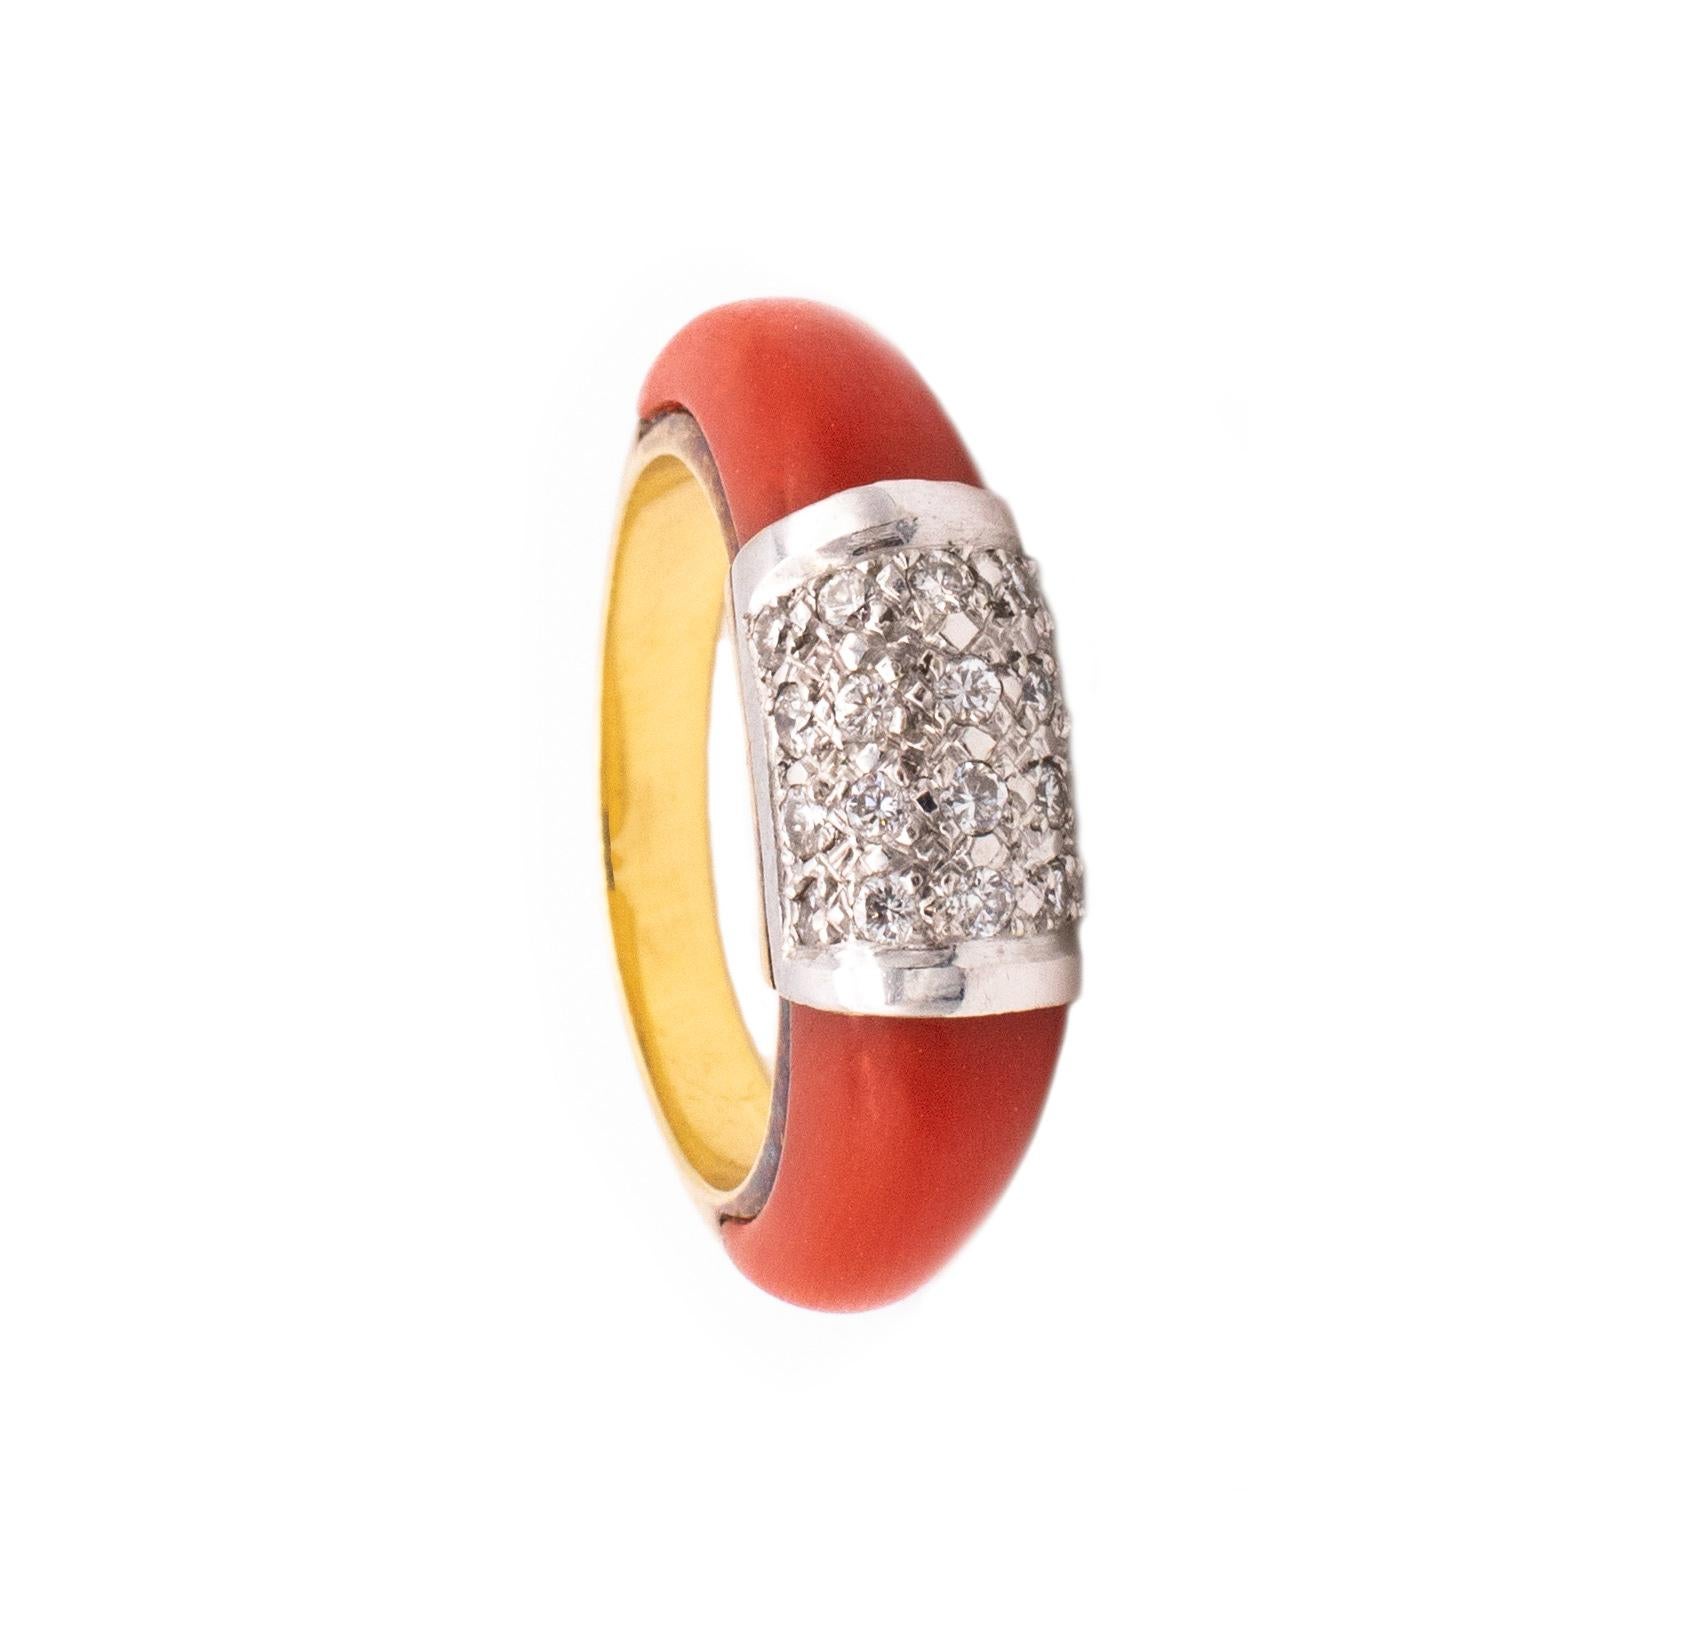 Van Cleef And Arpels Paris Philippines Ring 18Kt Yellow Gold Diamonds Red Coral. 1